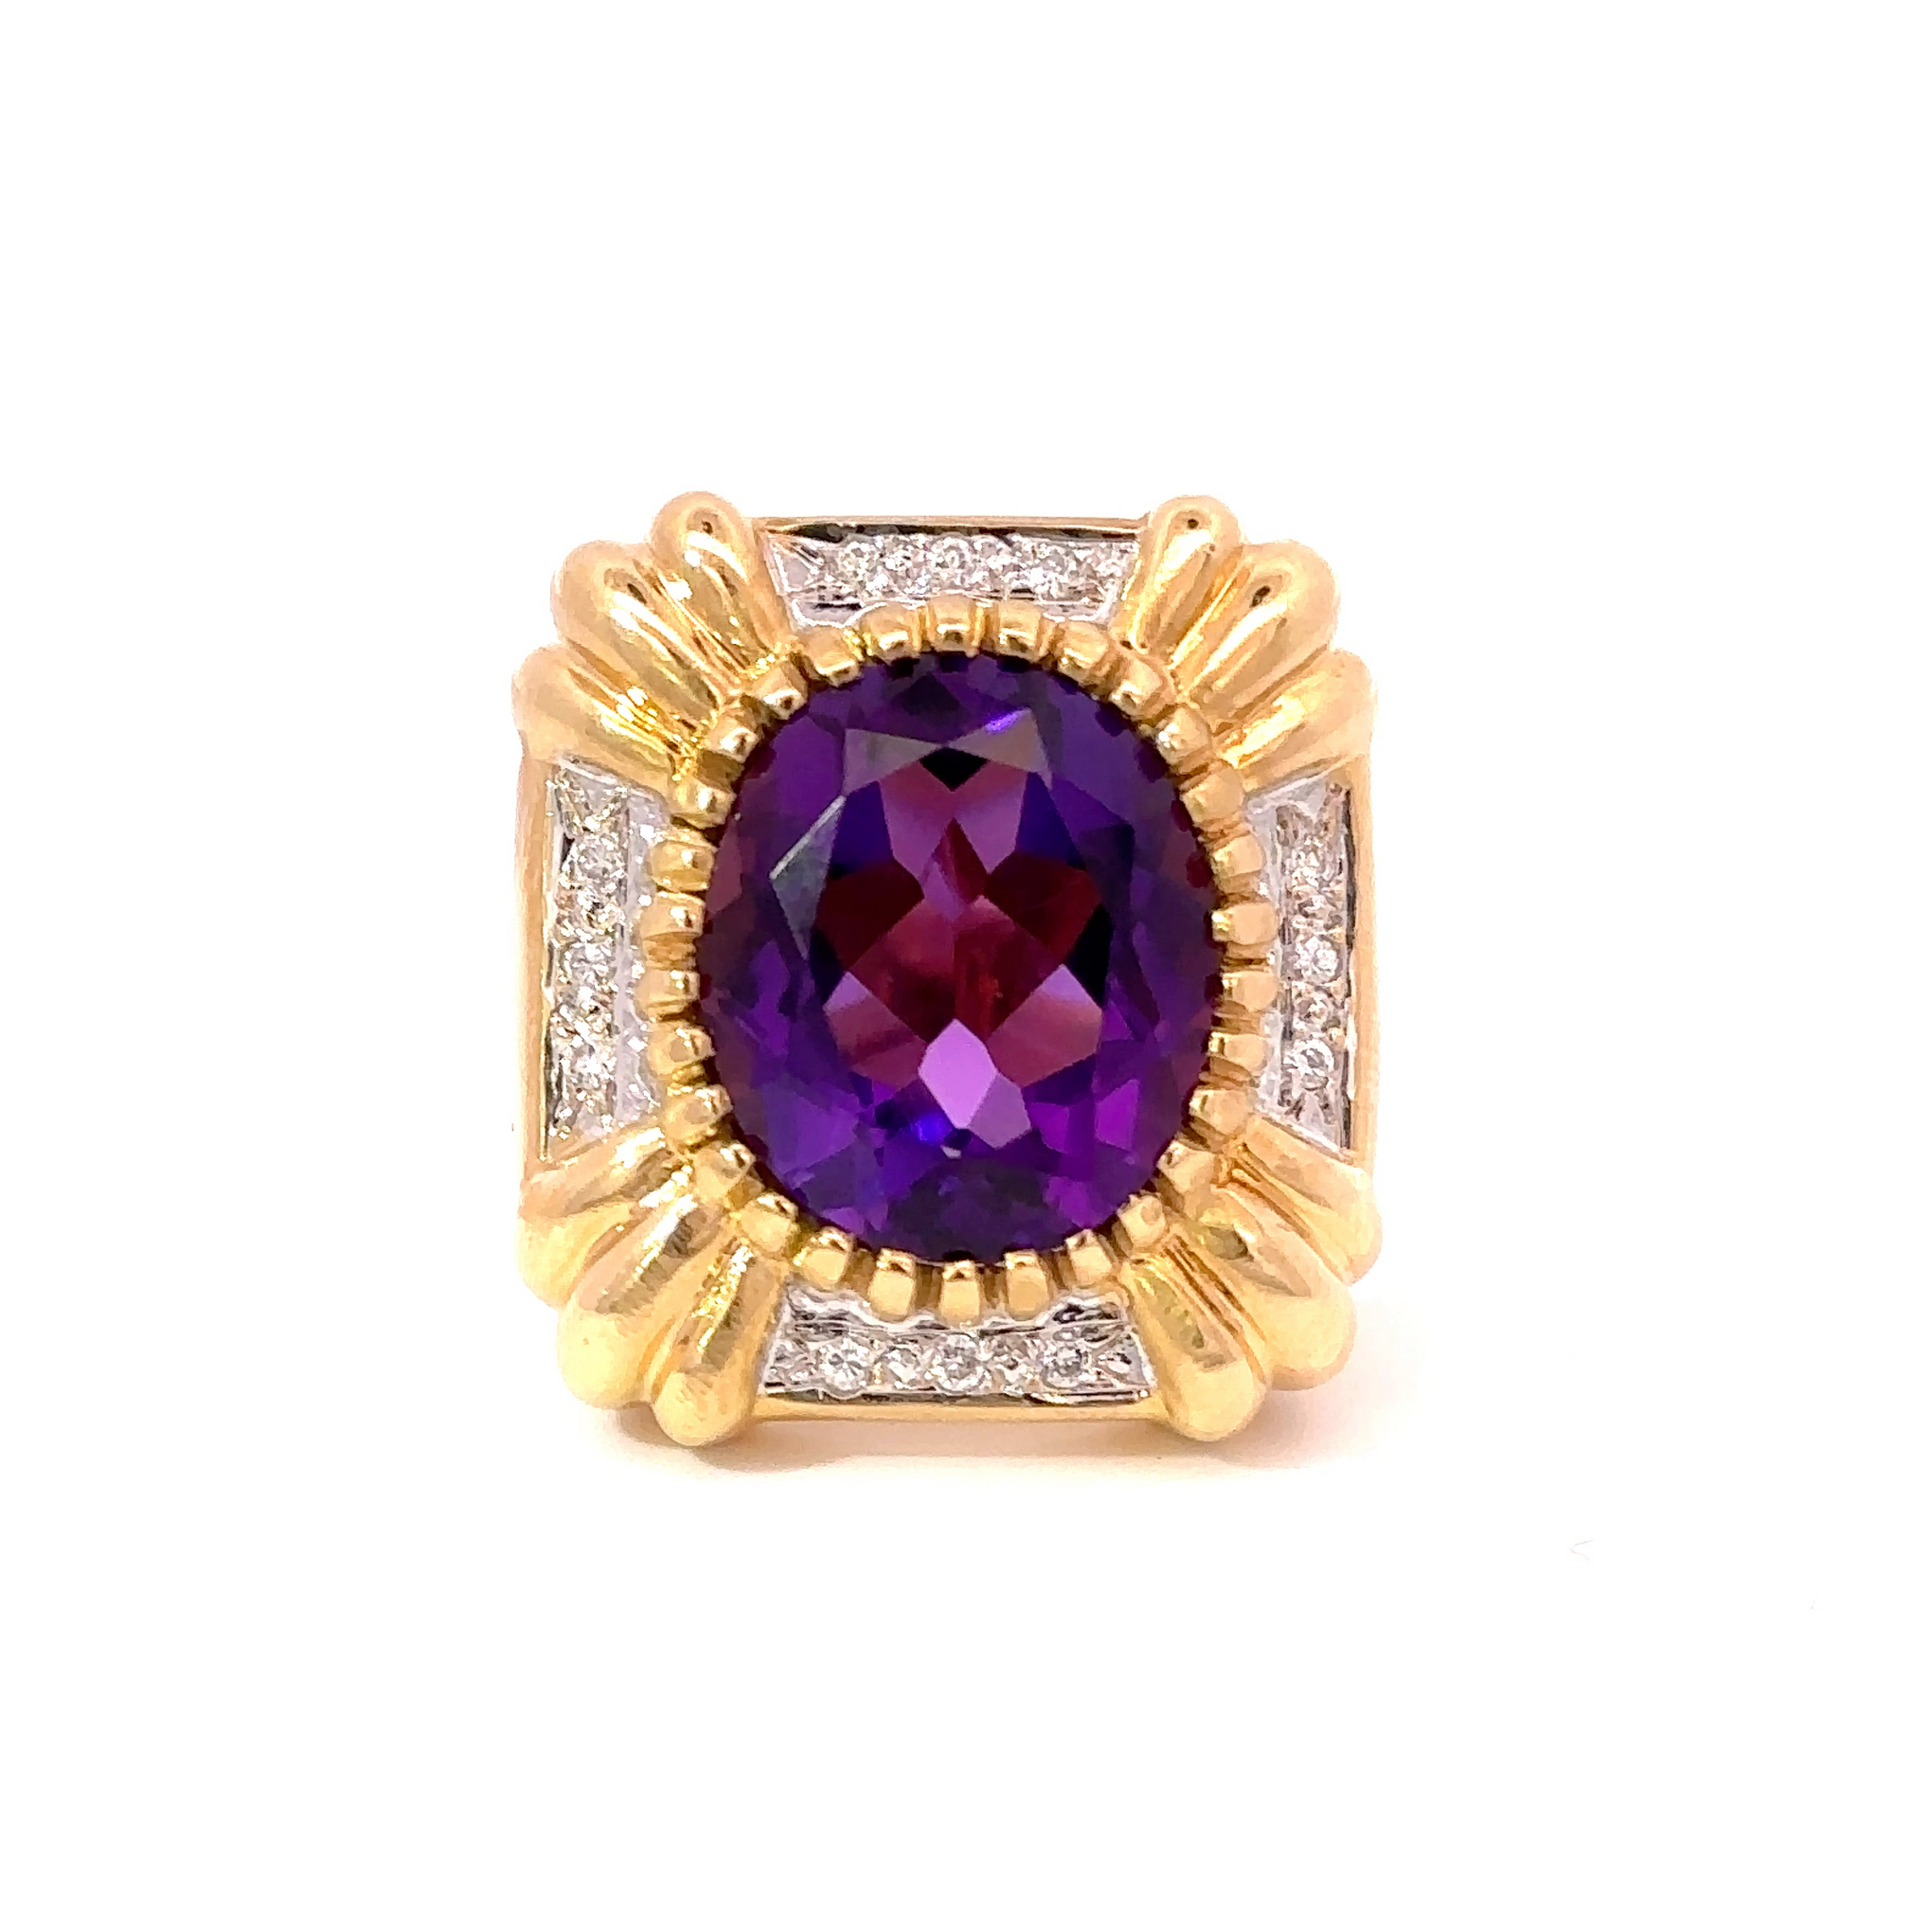 Vintage 1970s 18KT Yellow Gold Amethyst And Diamond Ring